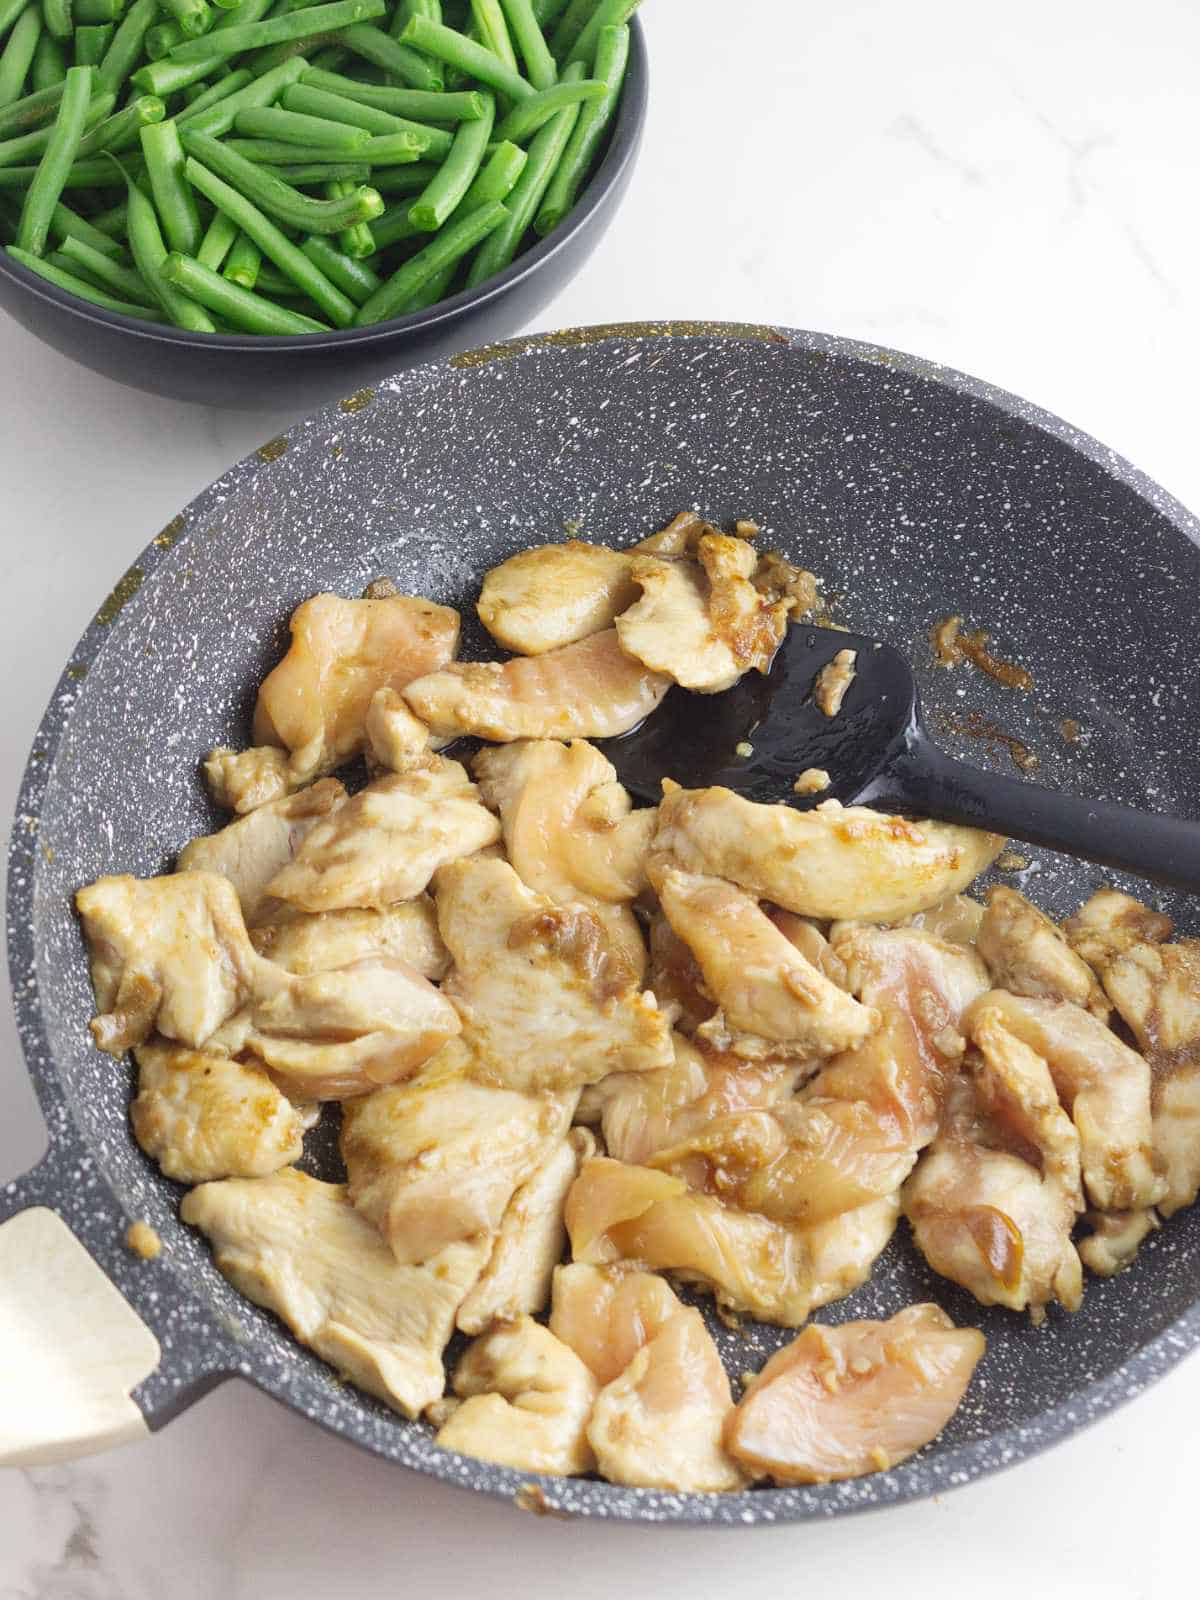 sauteed chicken breast slices in a skillet.